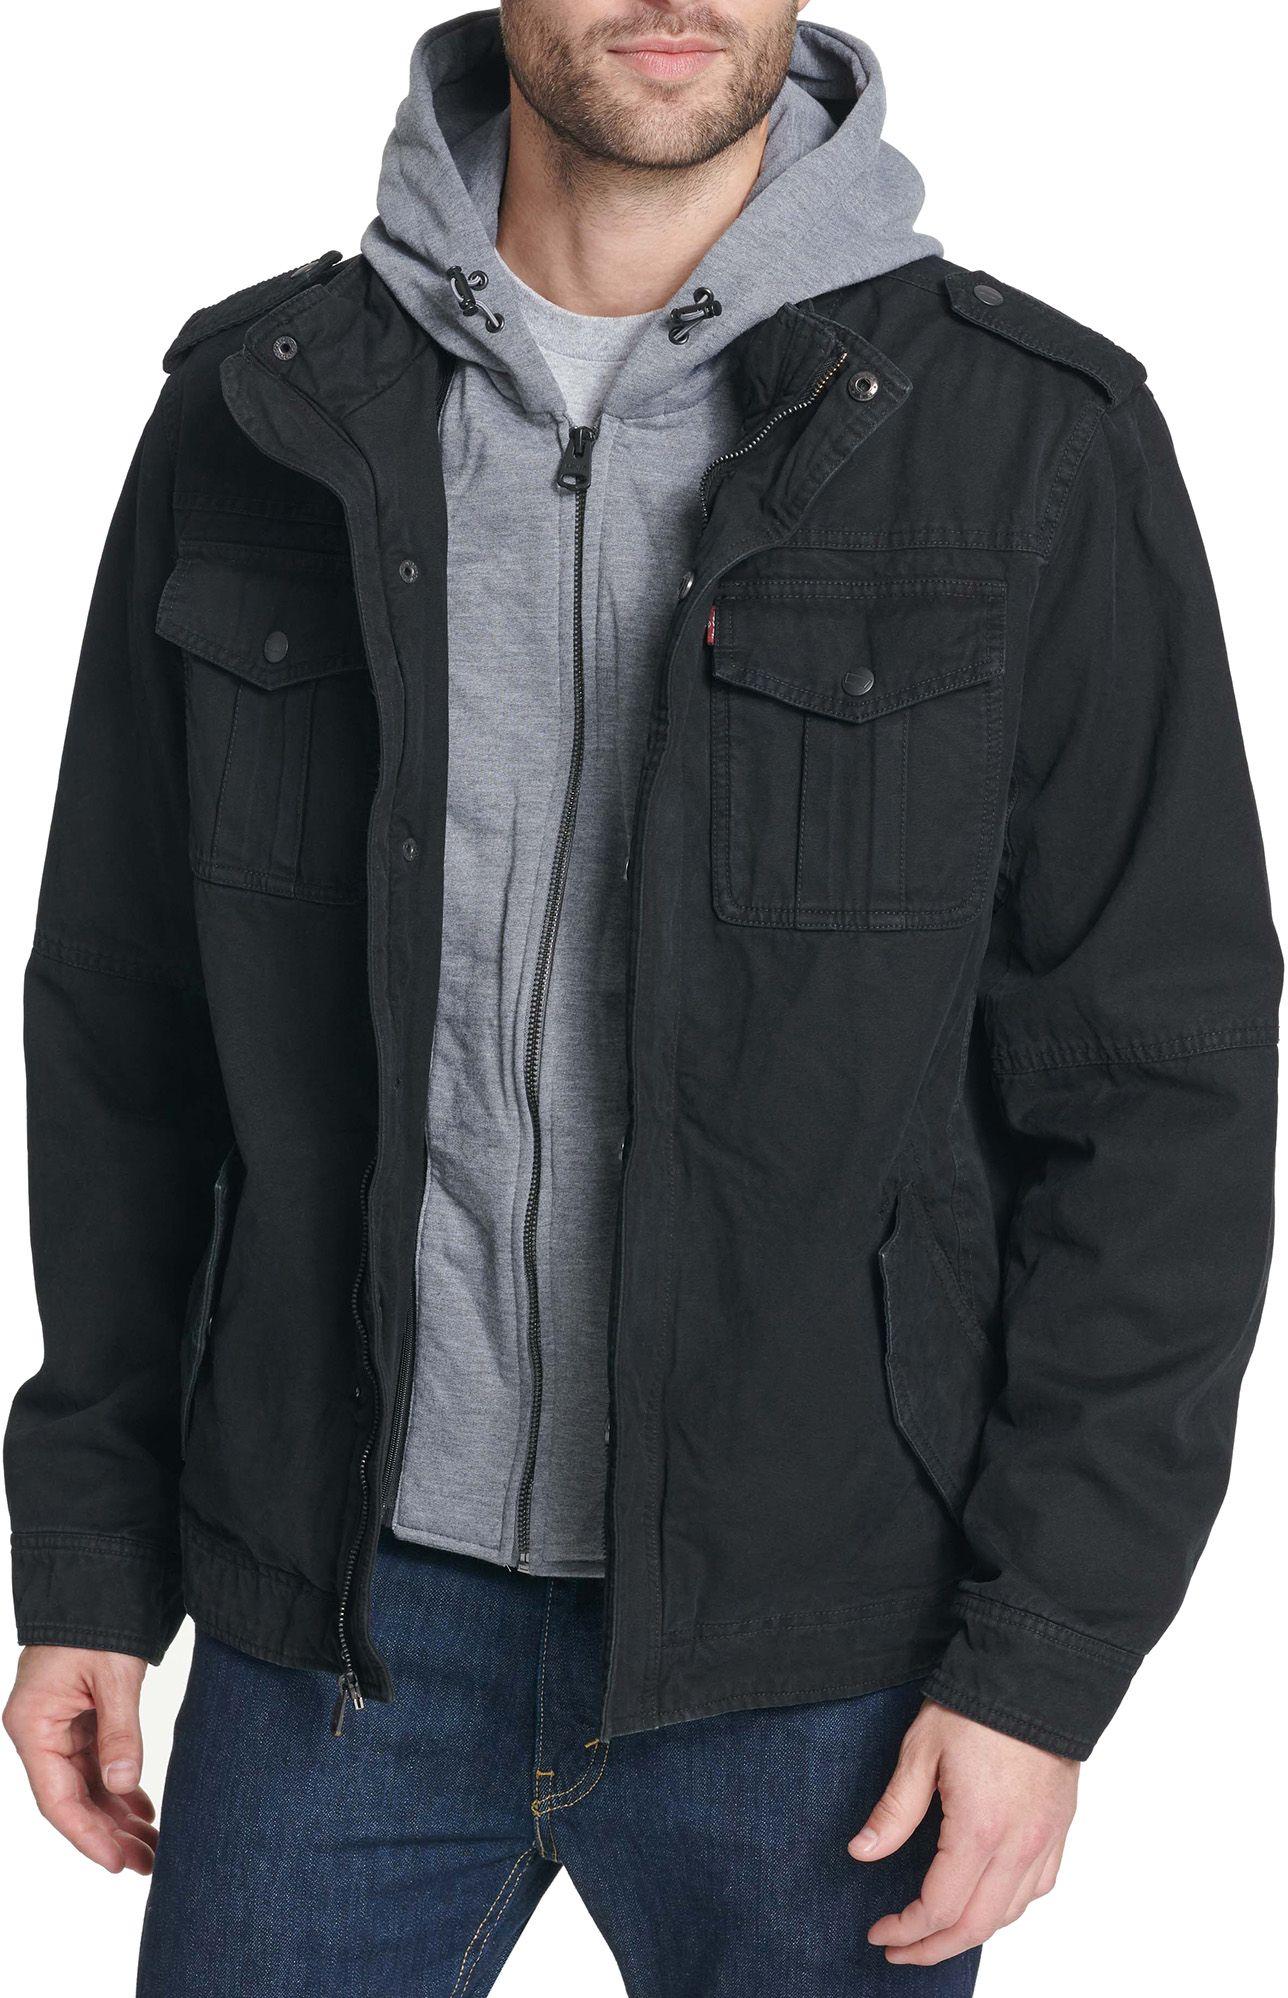 Levi's Sherpa Lined Hooded Utility Jacket in Black for Men - Lyst